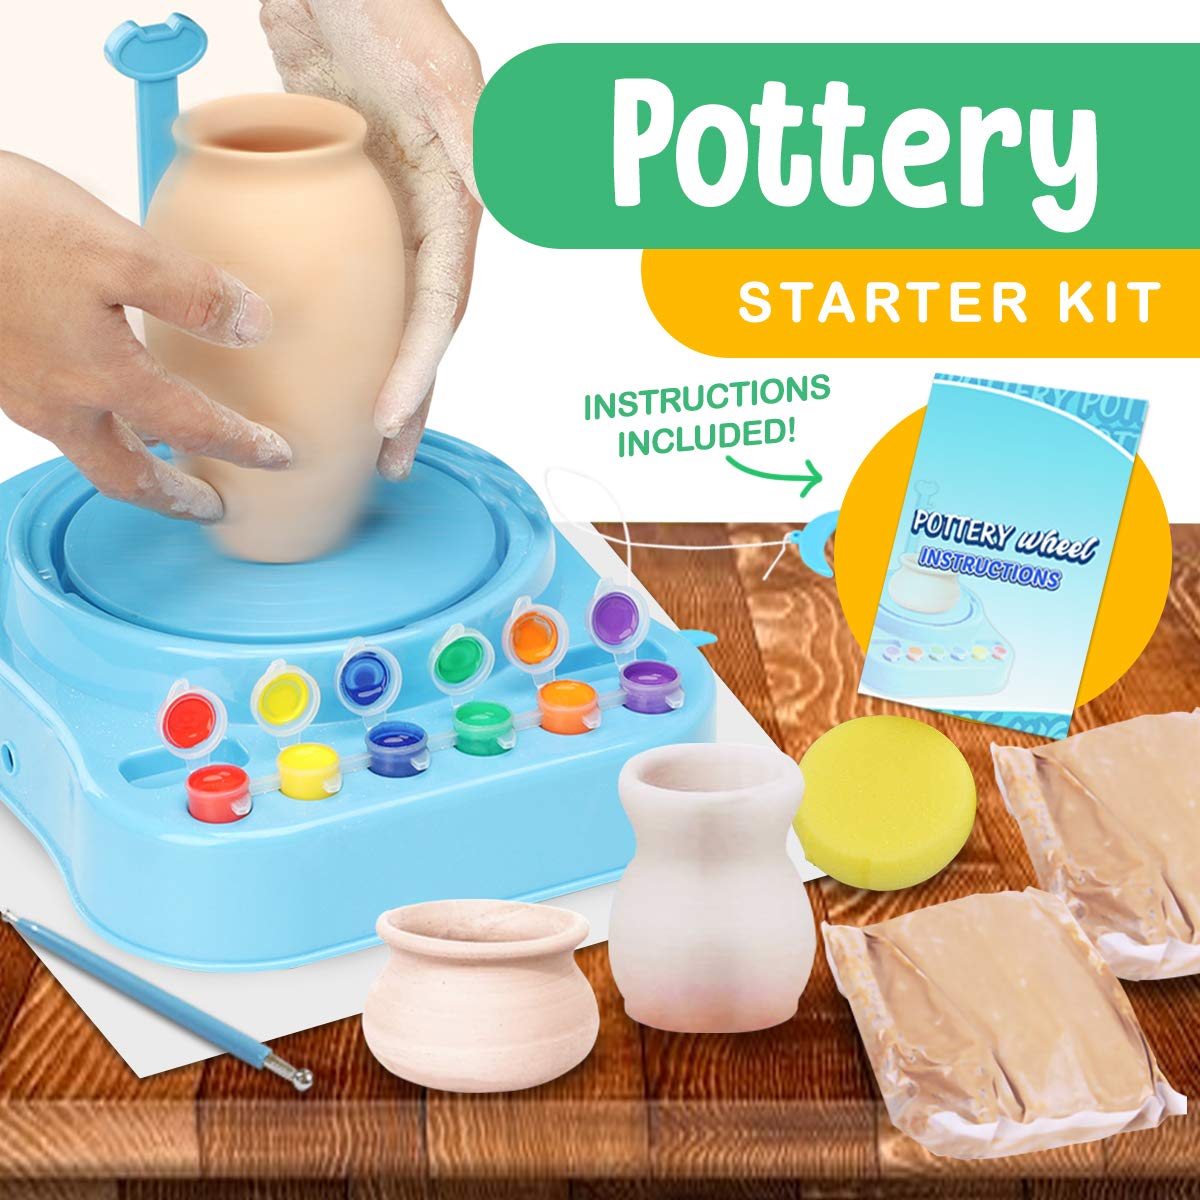 Insnug Kids Pottery Wheel Kit - Complete Pottery Wheel and Painting Kit for Beginners with Modeling Clay, Sculpting Clay and Sculpting Tools, Arts & Crafts, Craft Kits for Kids Age 8-12, 9-12